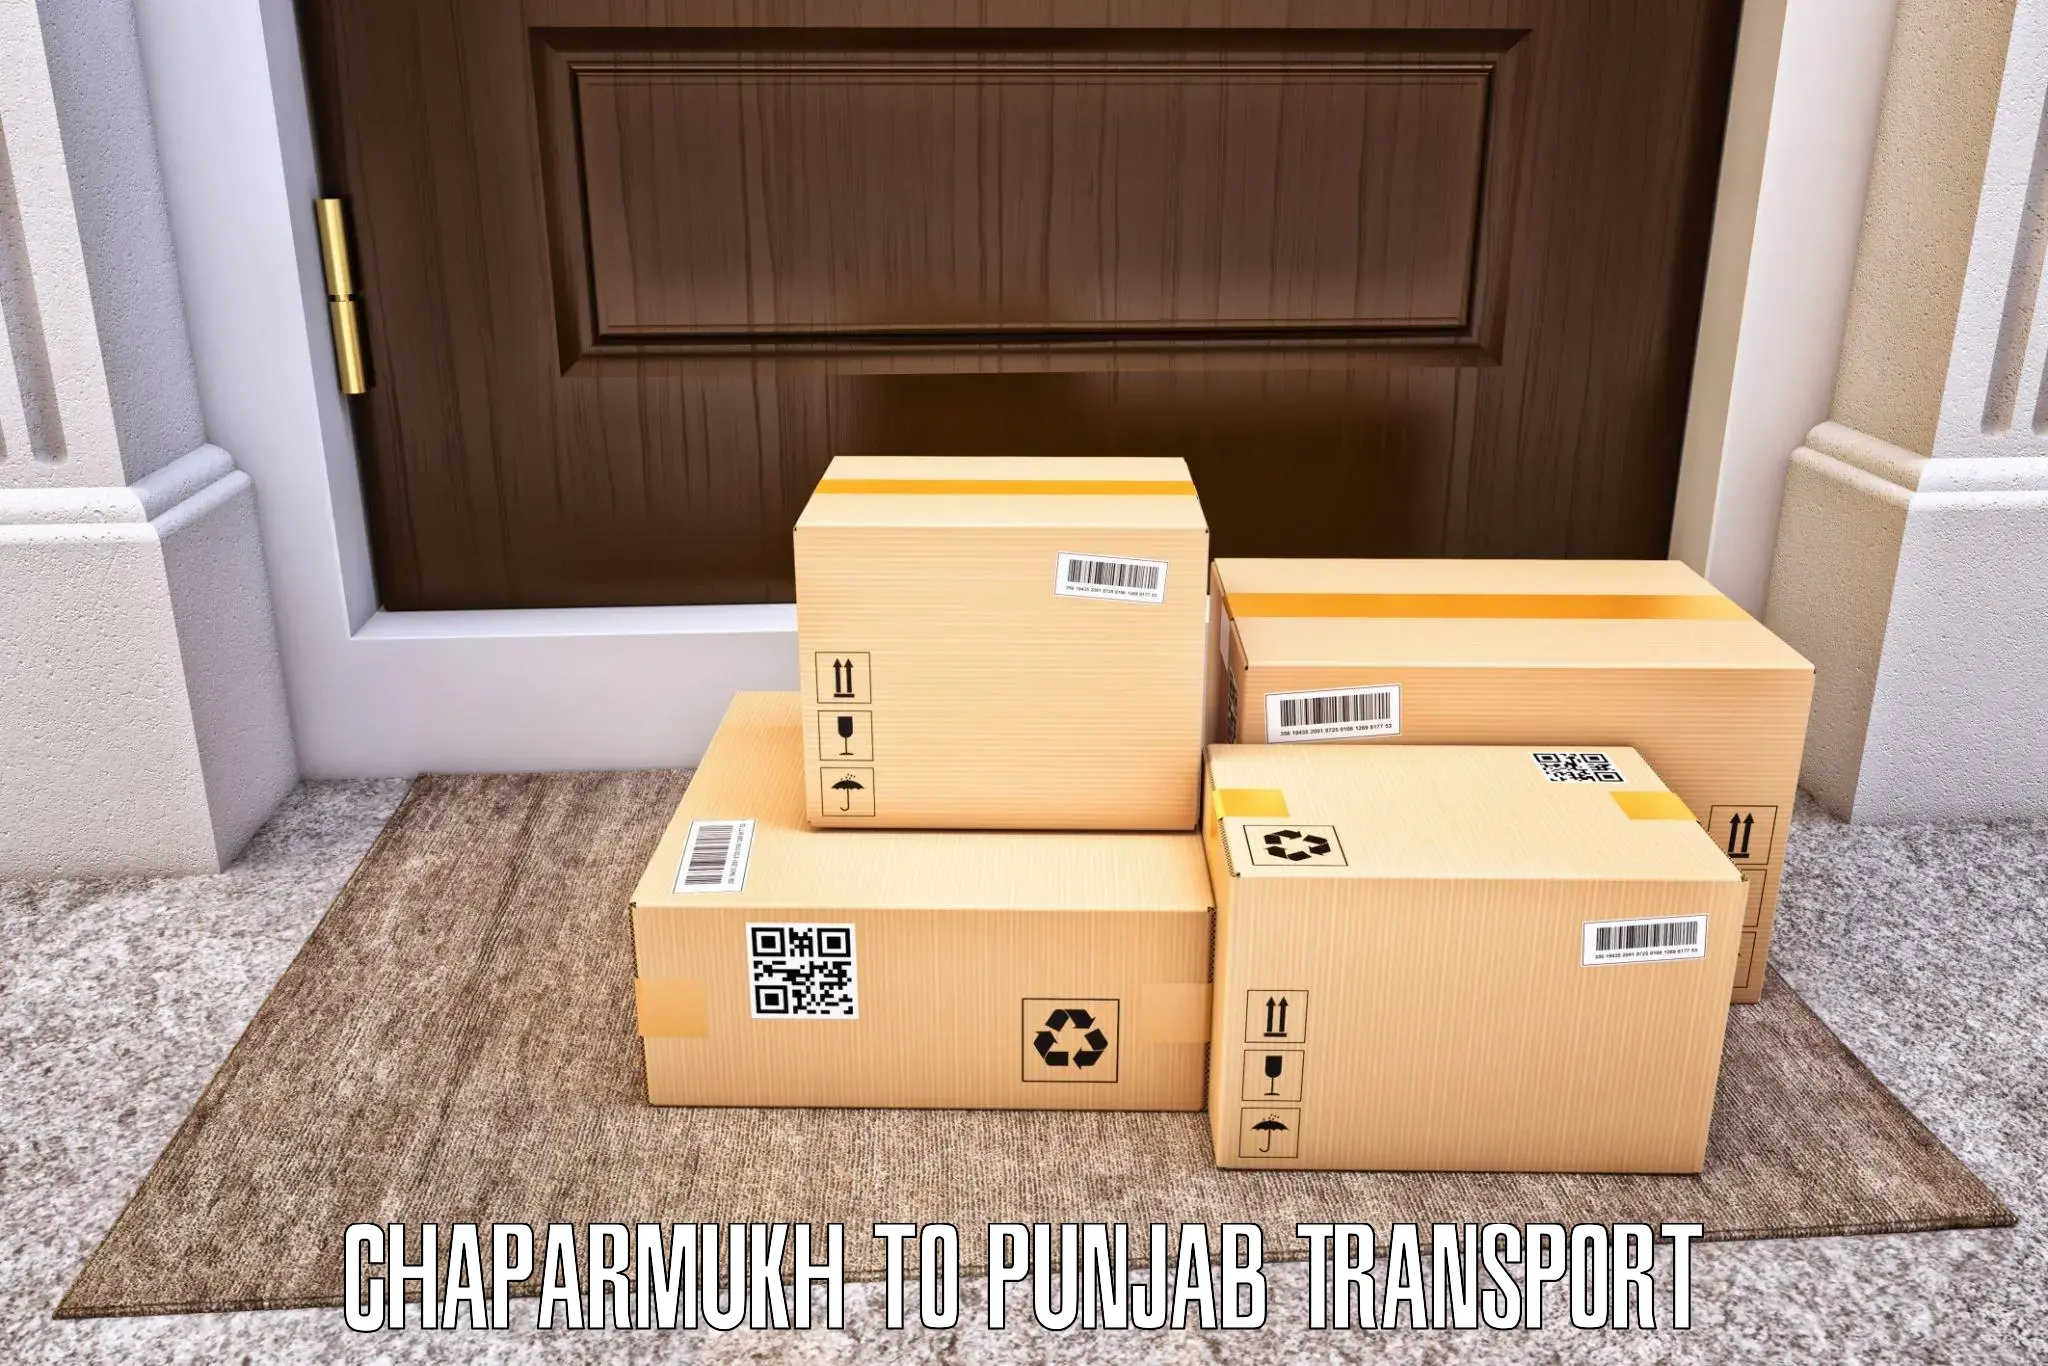 Vehicle transport services in Chaparmukh to Bathinda